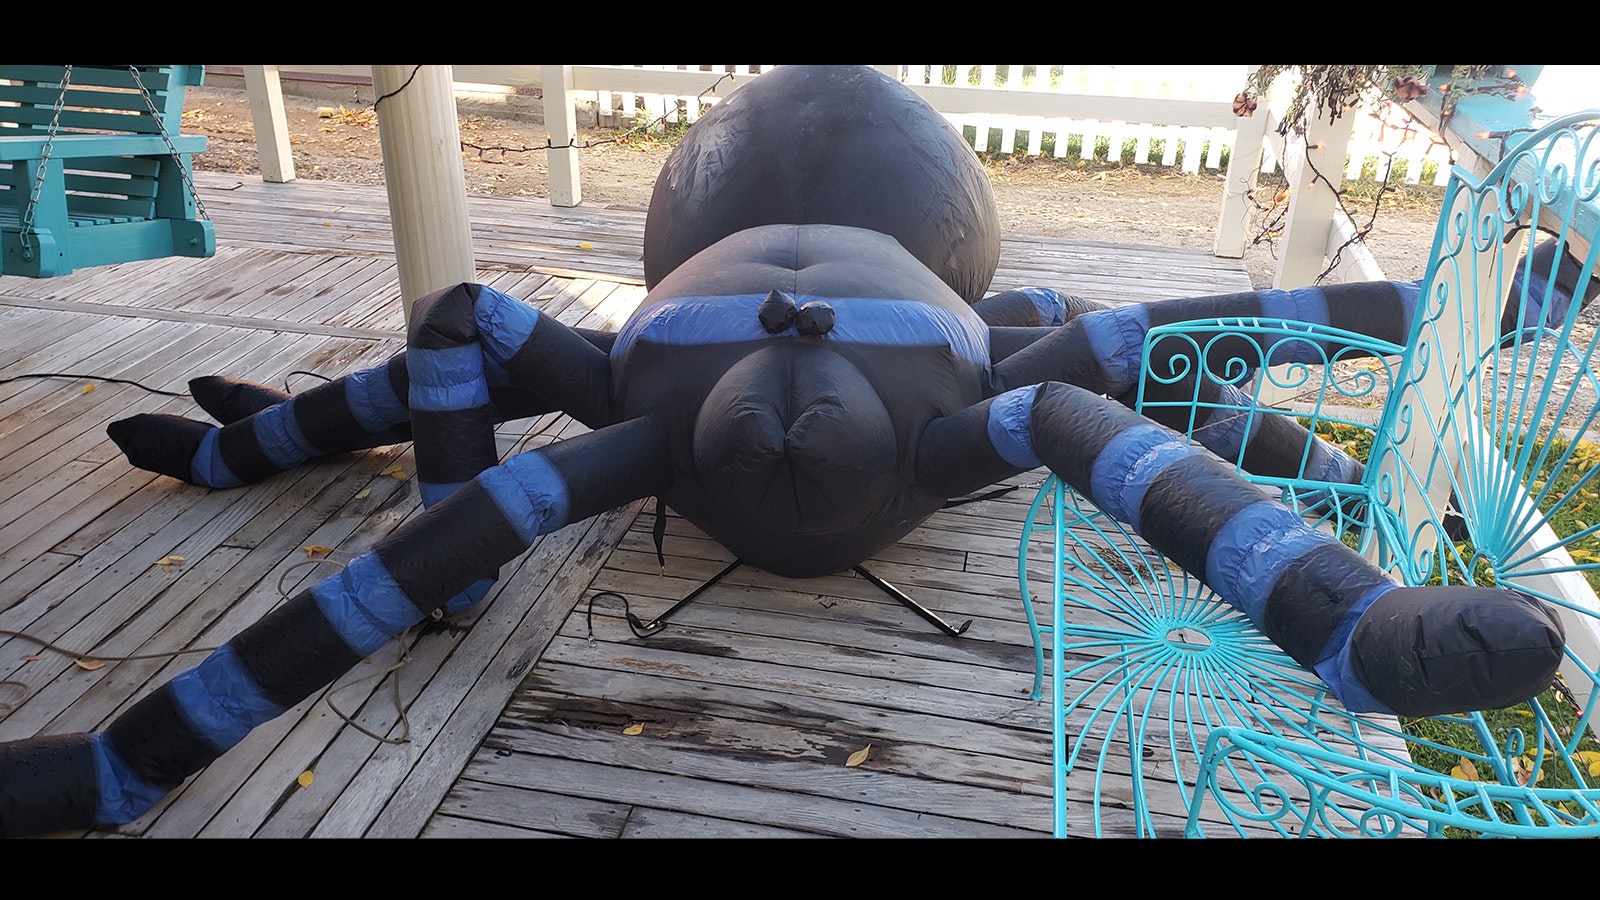 This giant inflatable spider is headed for the roof, where it will sit waiting to drop down on visitors.